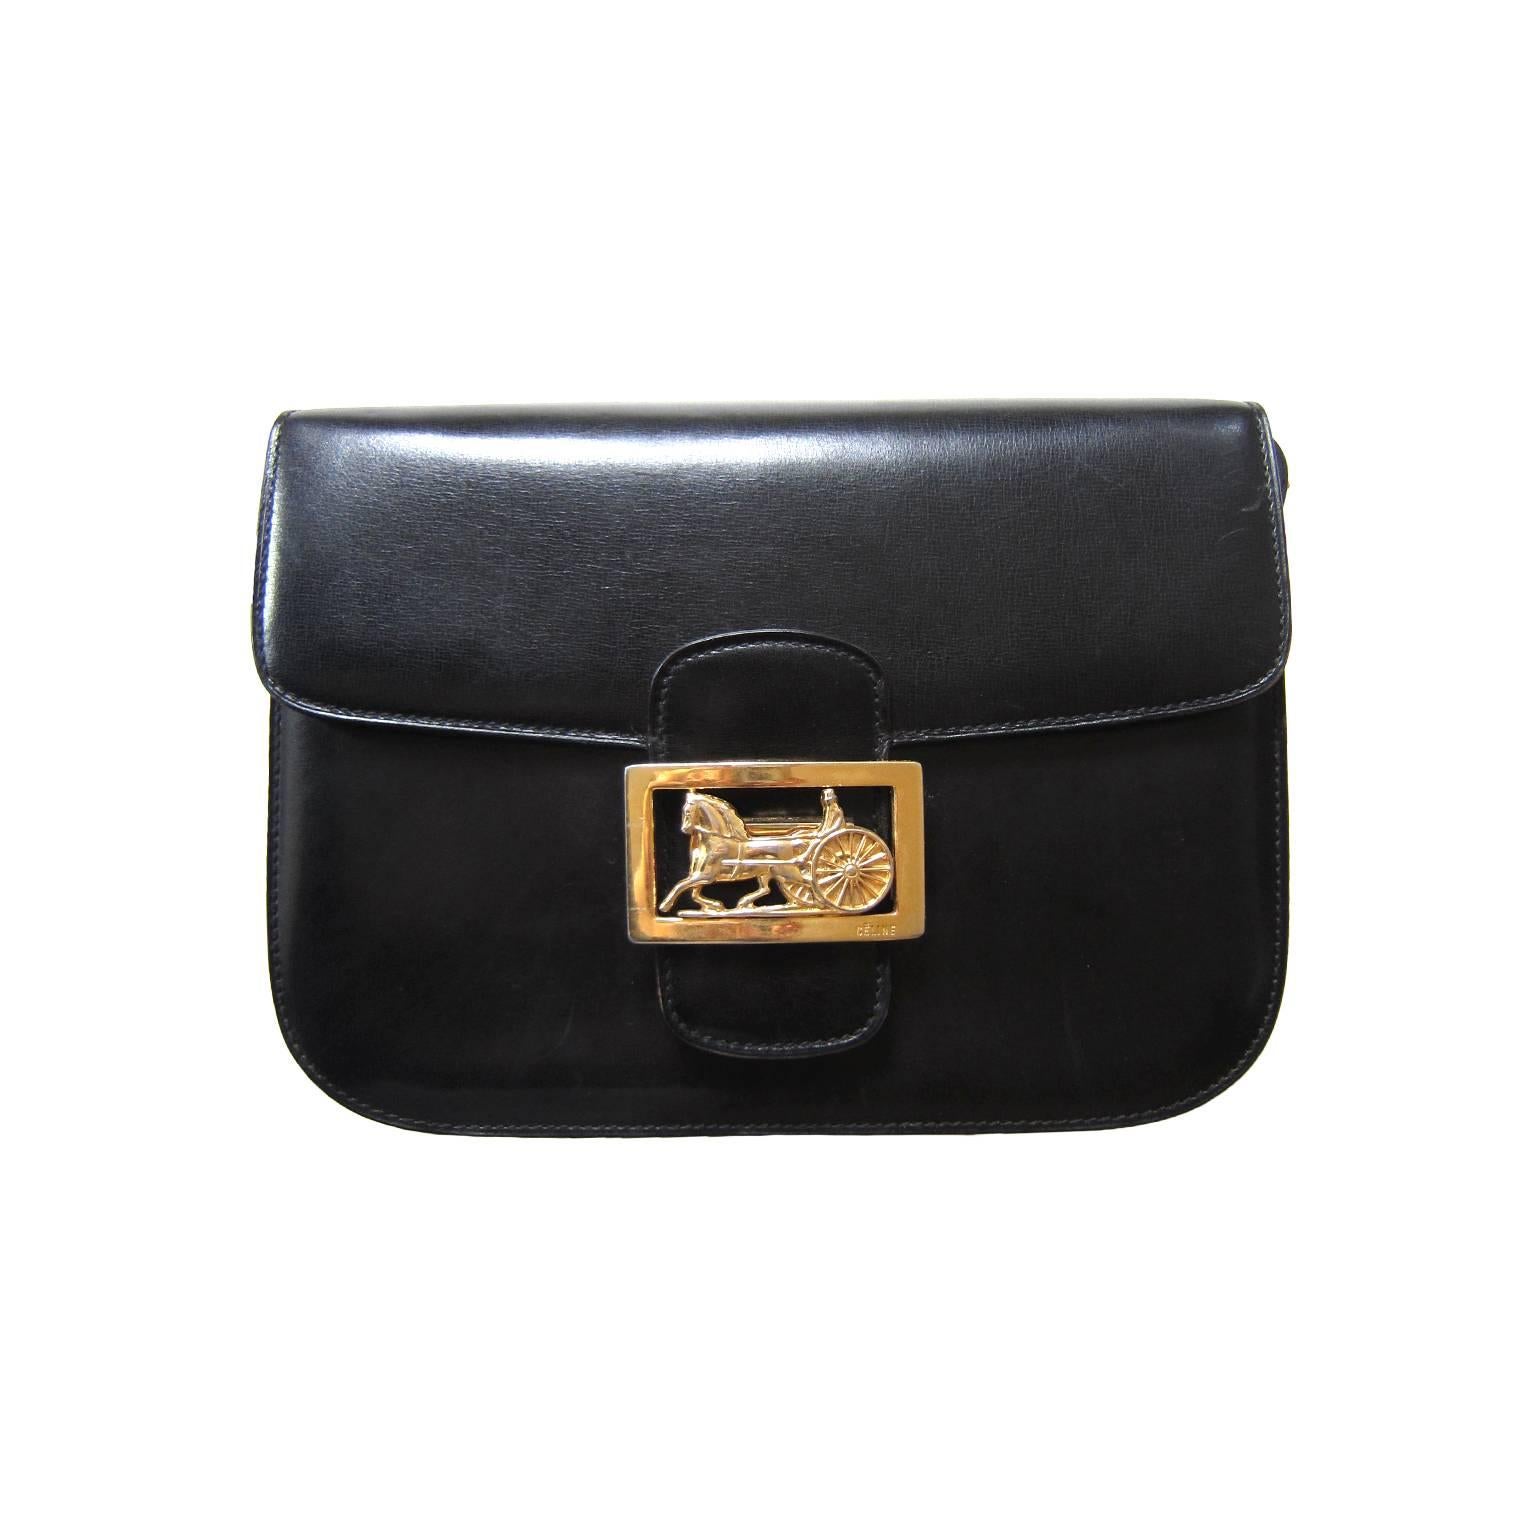 Céline vintage shoulder box bag in black leather from 70s. It has a beautifully crafted classic golden horse carriage closure. 
Inside - divided in three compartments - the back compartment features a zipper side pocket and the middle compartment